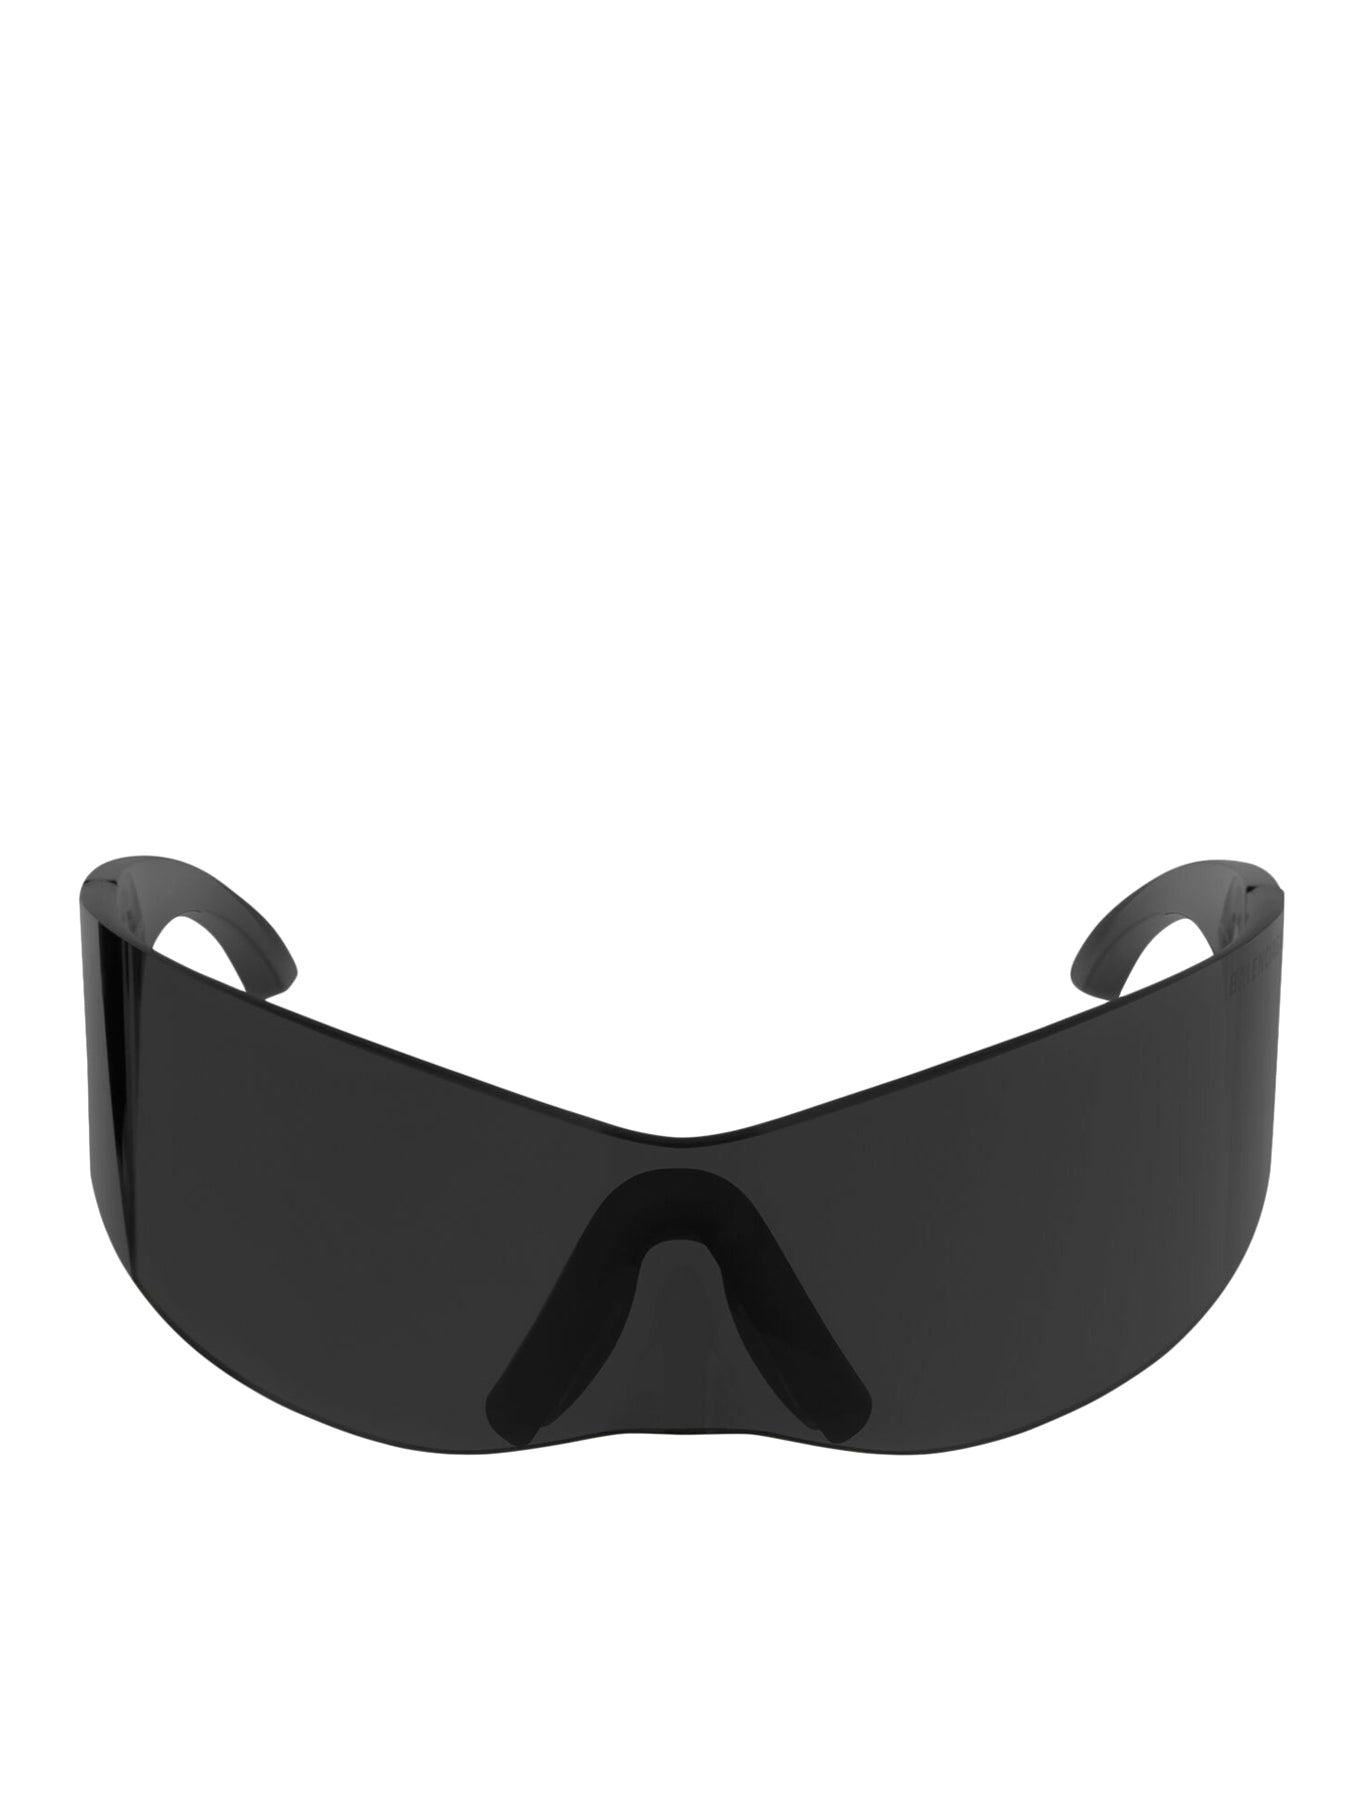 PANTHER MASK SUNGLASSES IN BLACK